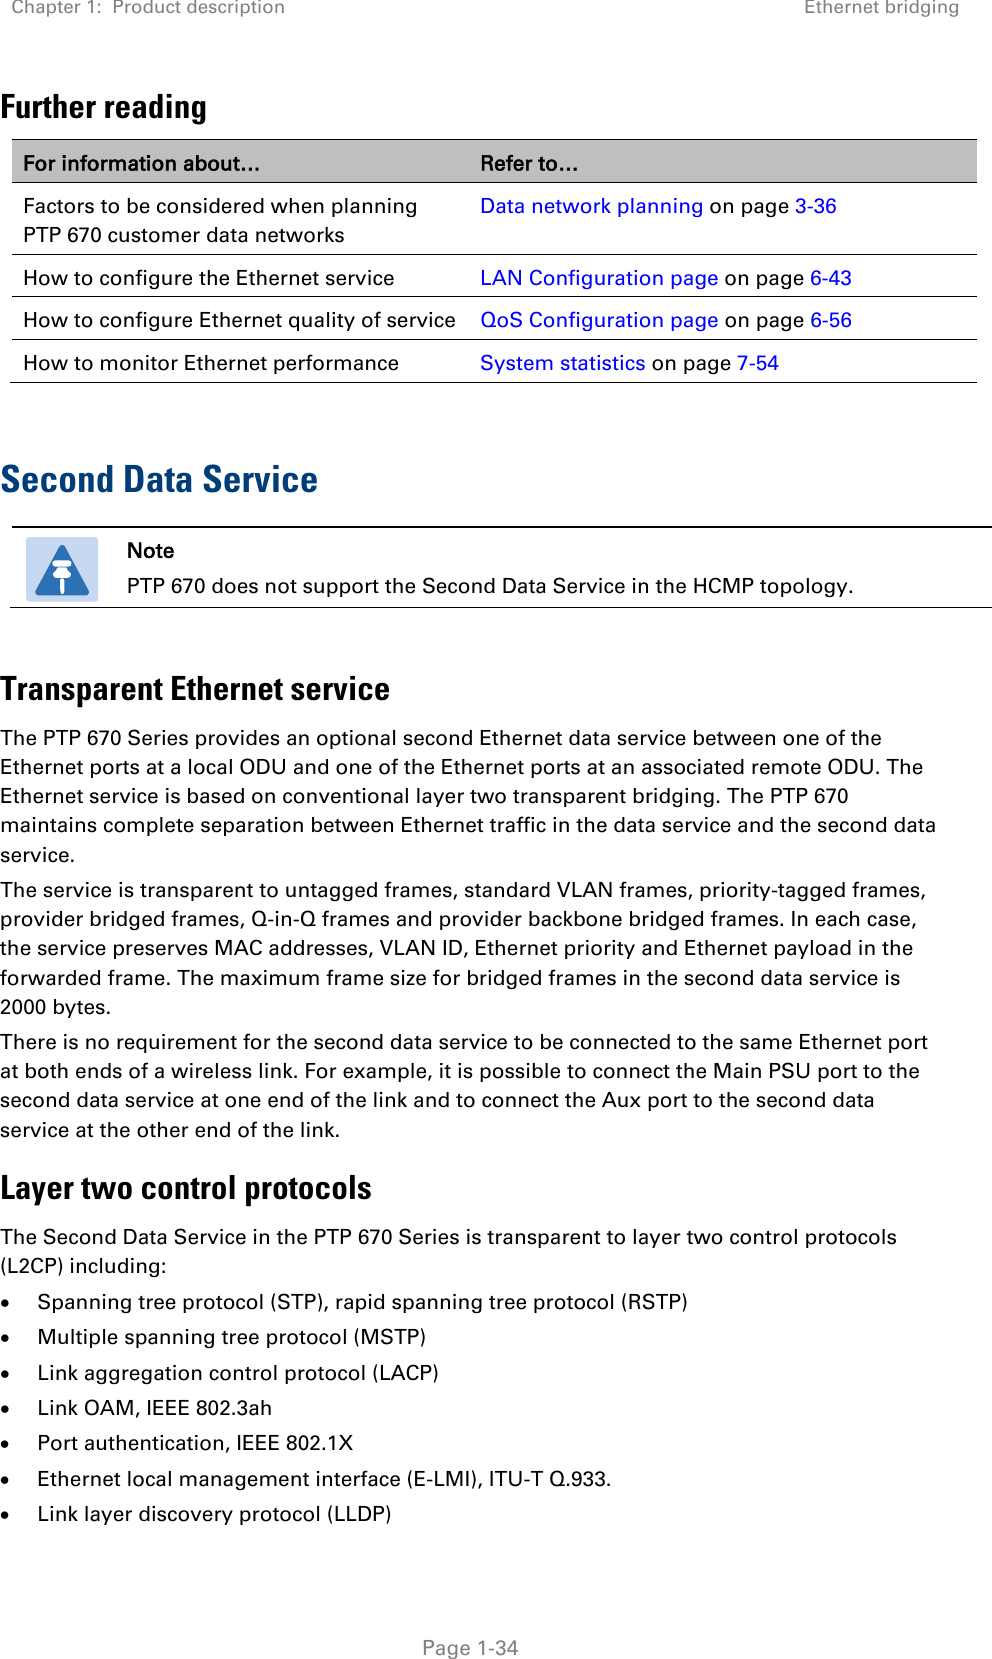 Chapter 1:  Product description Ethernet bridging   Page 1-34 Further reading For information about… Refer to… Factors to be considered when planning PTP 670 customer data networks Data network planning on page 3-36 How to configure the Ethernet service LAN Configuration page on page 6-43 How to configure Ethernet quality of service QoS Configuration page on page 6-56 How to monitor Ethernet performance System statistics on page 7-54  Second Data Service  Note PTP 670 does not support the Second Data Service in the HCMP topology.  Transparent Ethernet service The PTP 670 Series provides an optional second Ethernet data service between one of the Ethernet ports at a local ODU and one of the Ethernet ports at an associated remote ODU. The Ethernet service is based on conventional layer two transparent bridging. The PTP 670 maintains complete separation between Ethernet traffic in the data service and the second data service. The service is transparent to untagged frames, standard VLAN frames, priority-tagged frames, provider bridged frames, Q-in-Q frames and provider backbone bridged frames. In each case, the service preserves MAC addresses, VLAN ID, Ethernet priority and Ethernet payload in the forwarded frame. The maximum frame size for bridged frames in the second data service is 2000 bytes. There is no requirement for the second data service to be connected to the same Ethernet port at both ends of a wireless link. For example, it is possible to connect the Main PSU port to the second data service at one end of the link and to connect the Aux port to the second data service at the other end of the link. Layer two control protocols The Second Data Service in the PTP 670 Series is transparent to layer two control protocols (L2CP) including: • Spanning tree protocol (STP), rapid spanning tree protocol (RSTP) • Multiple spanning tree protocol (MSTP) • Link aggregation control protocol (LACP) • Link OAM, IEEE 802.3ah • Port authentication, IEEE 802.1X • Ethernet local management interface (E-LMI), ITU-T Q.933. • Link layer discovery protocol (LLDP) 